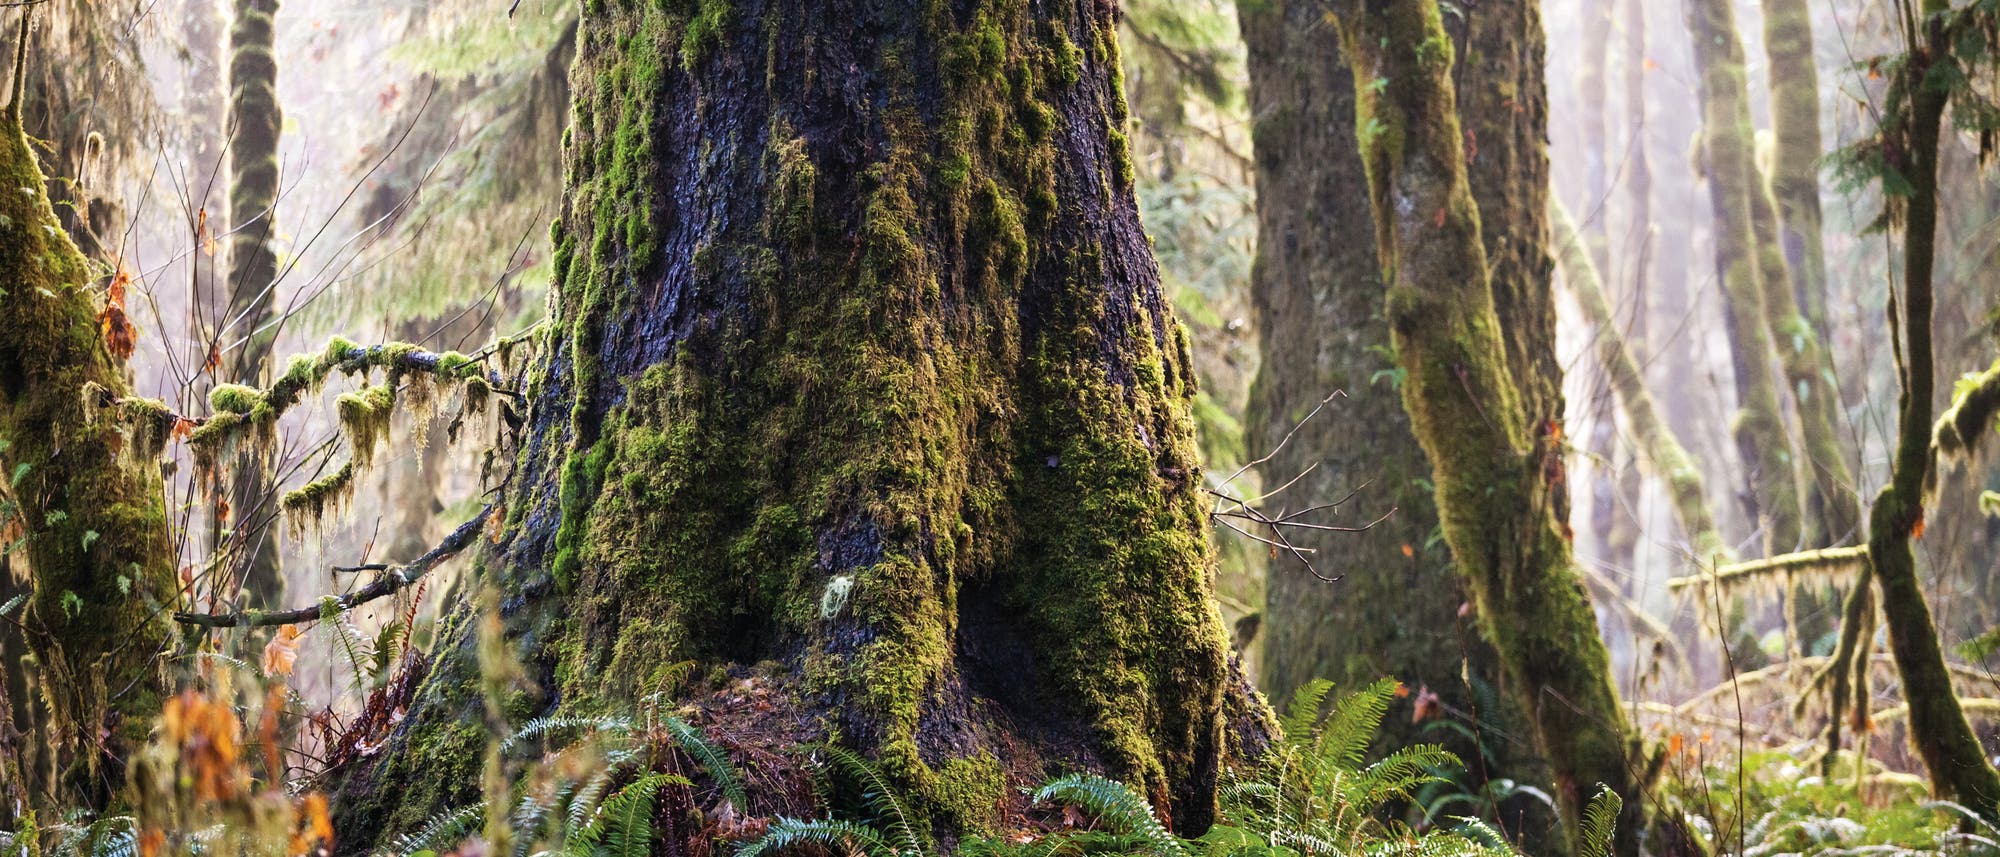 "Ancient Forest" in British Columbia